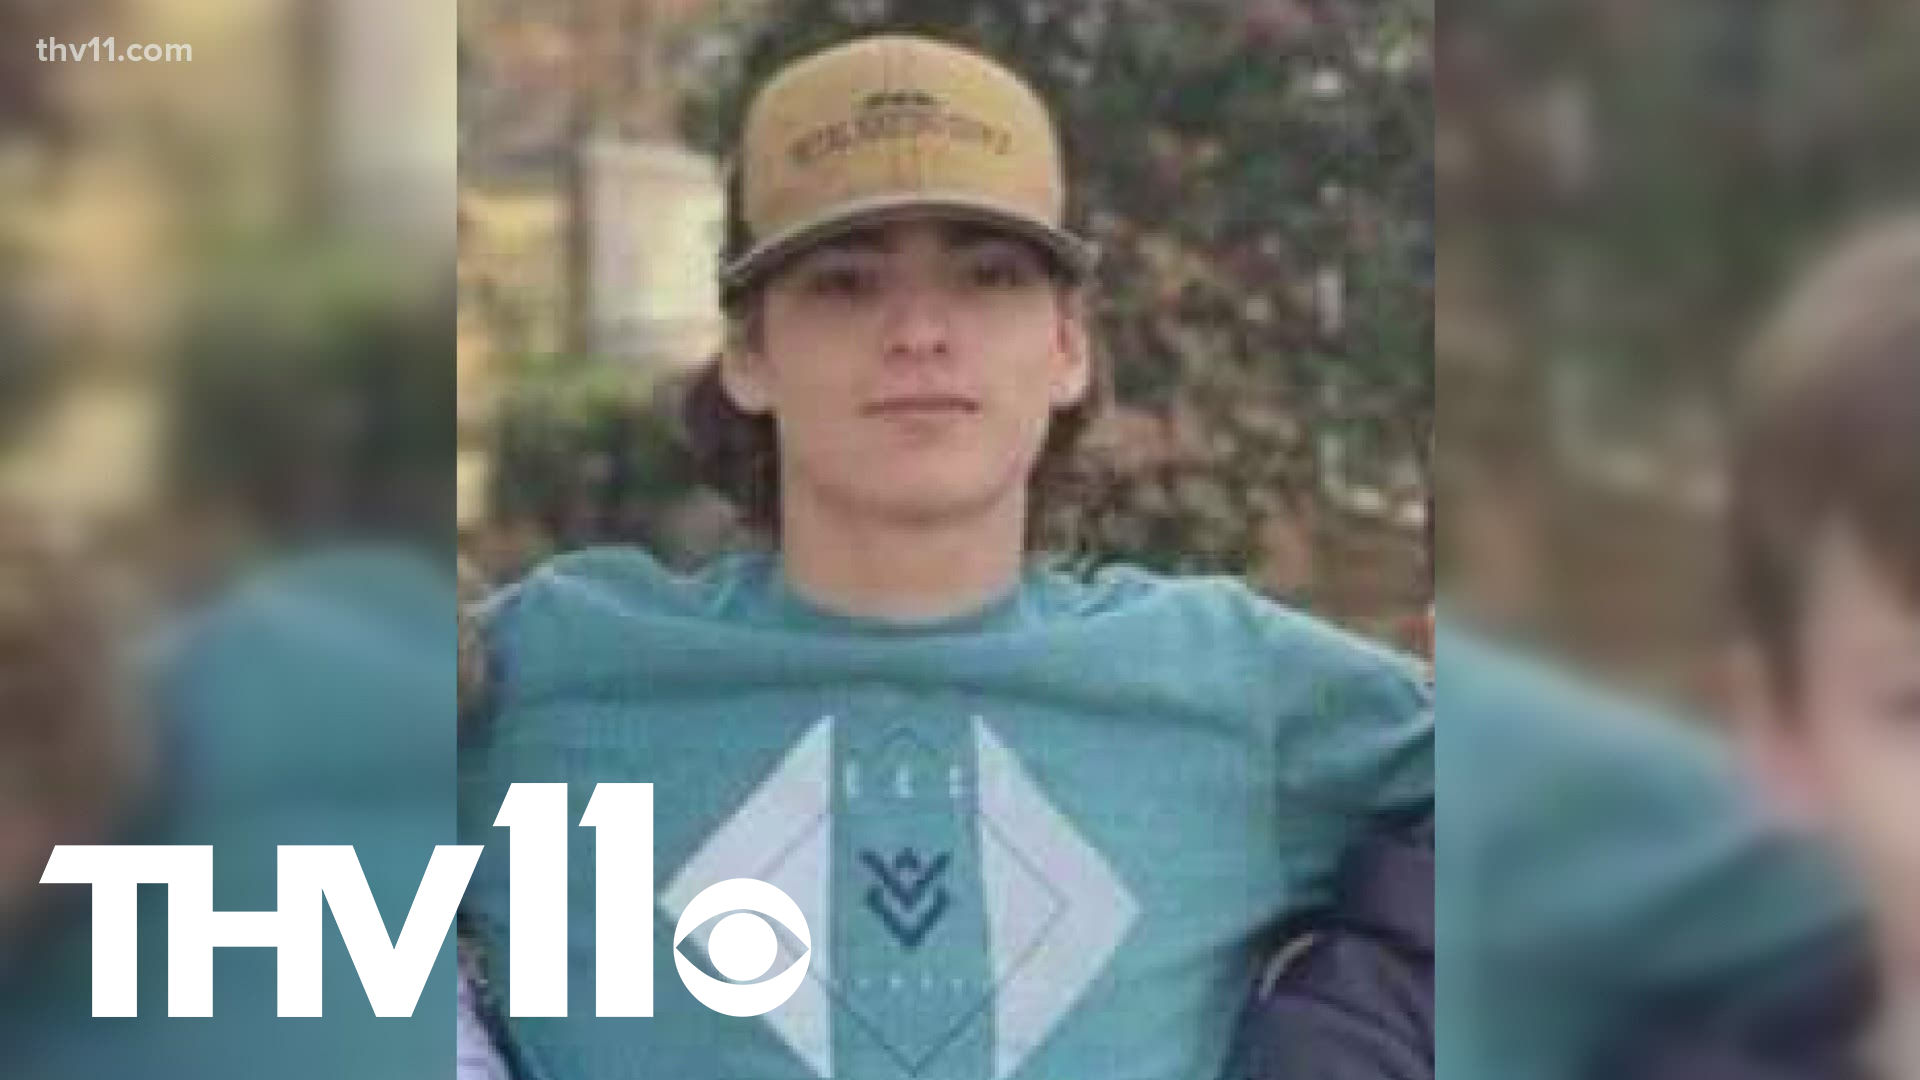 Nearly a week after his death and no answers, the family of Hunter Brittain, who was killed by a deputy during a traffic stop, are continuing to demand answers.